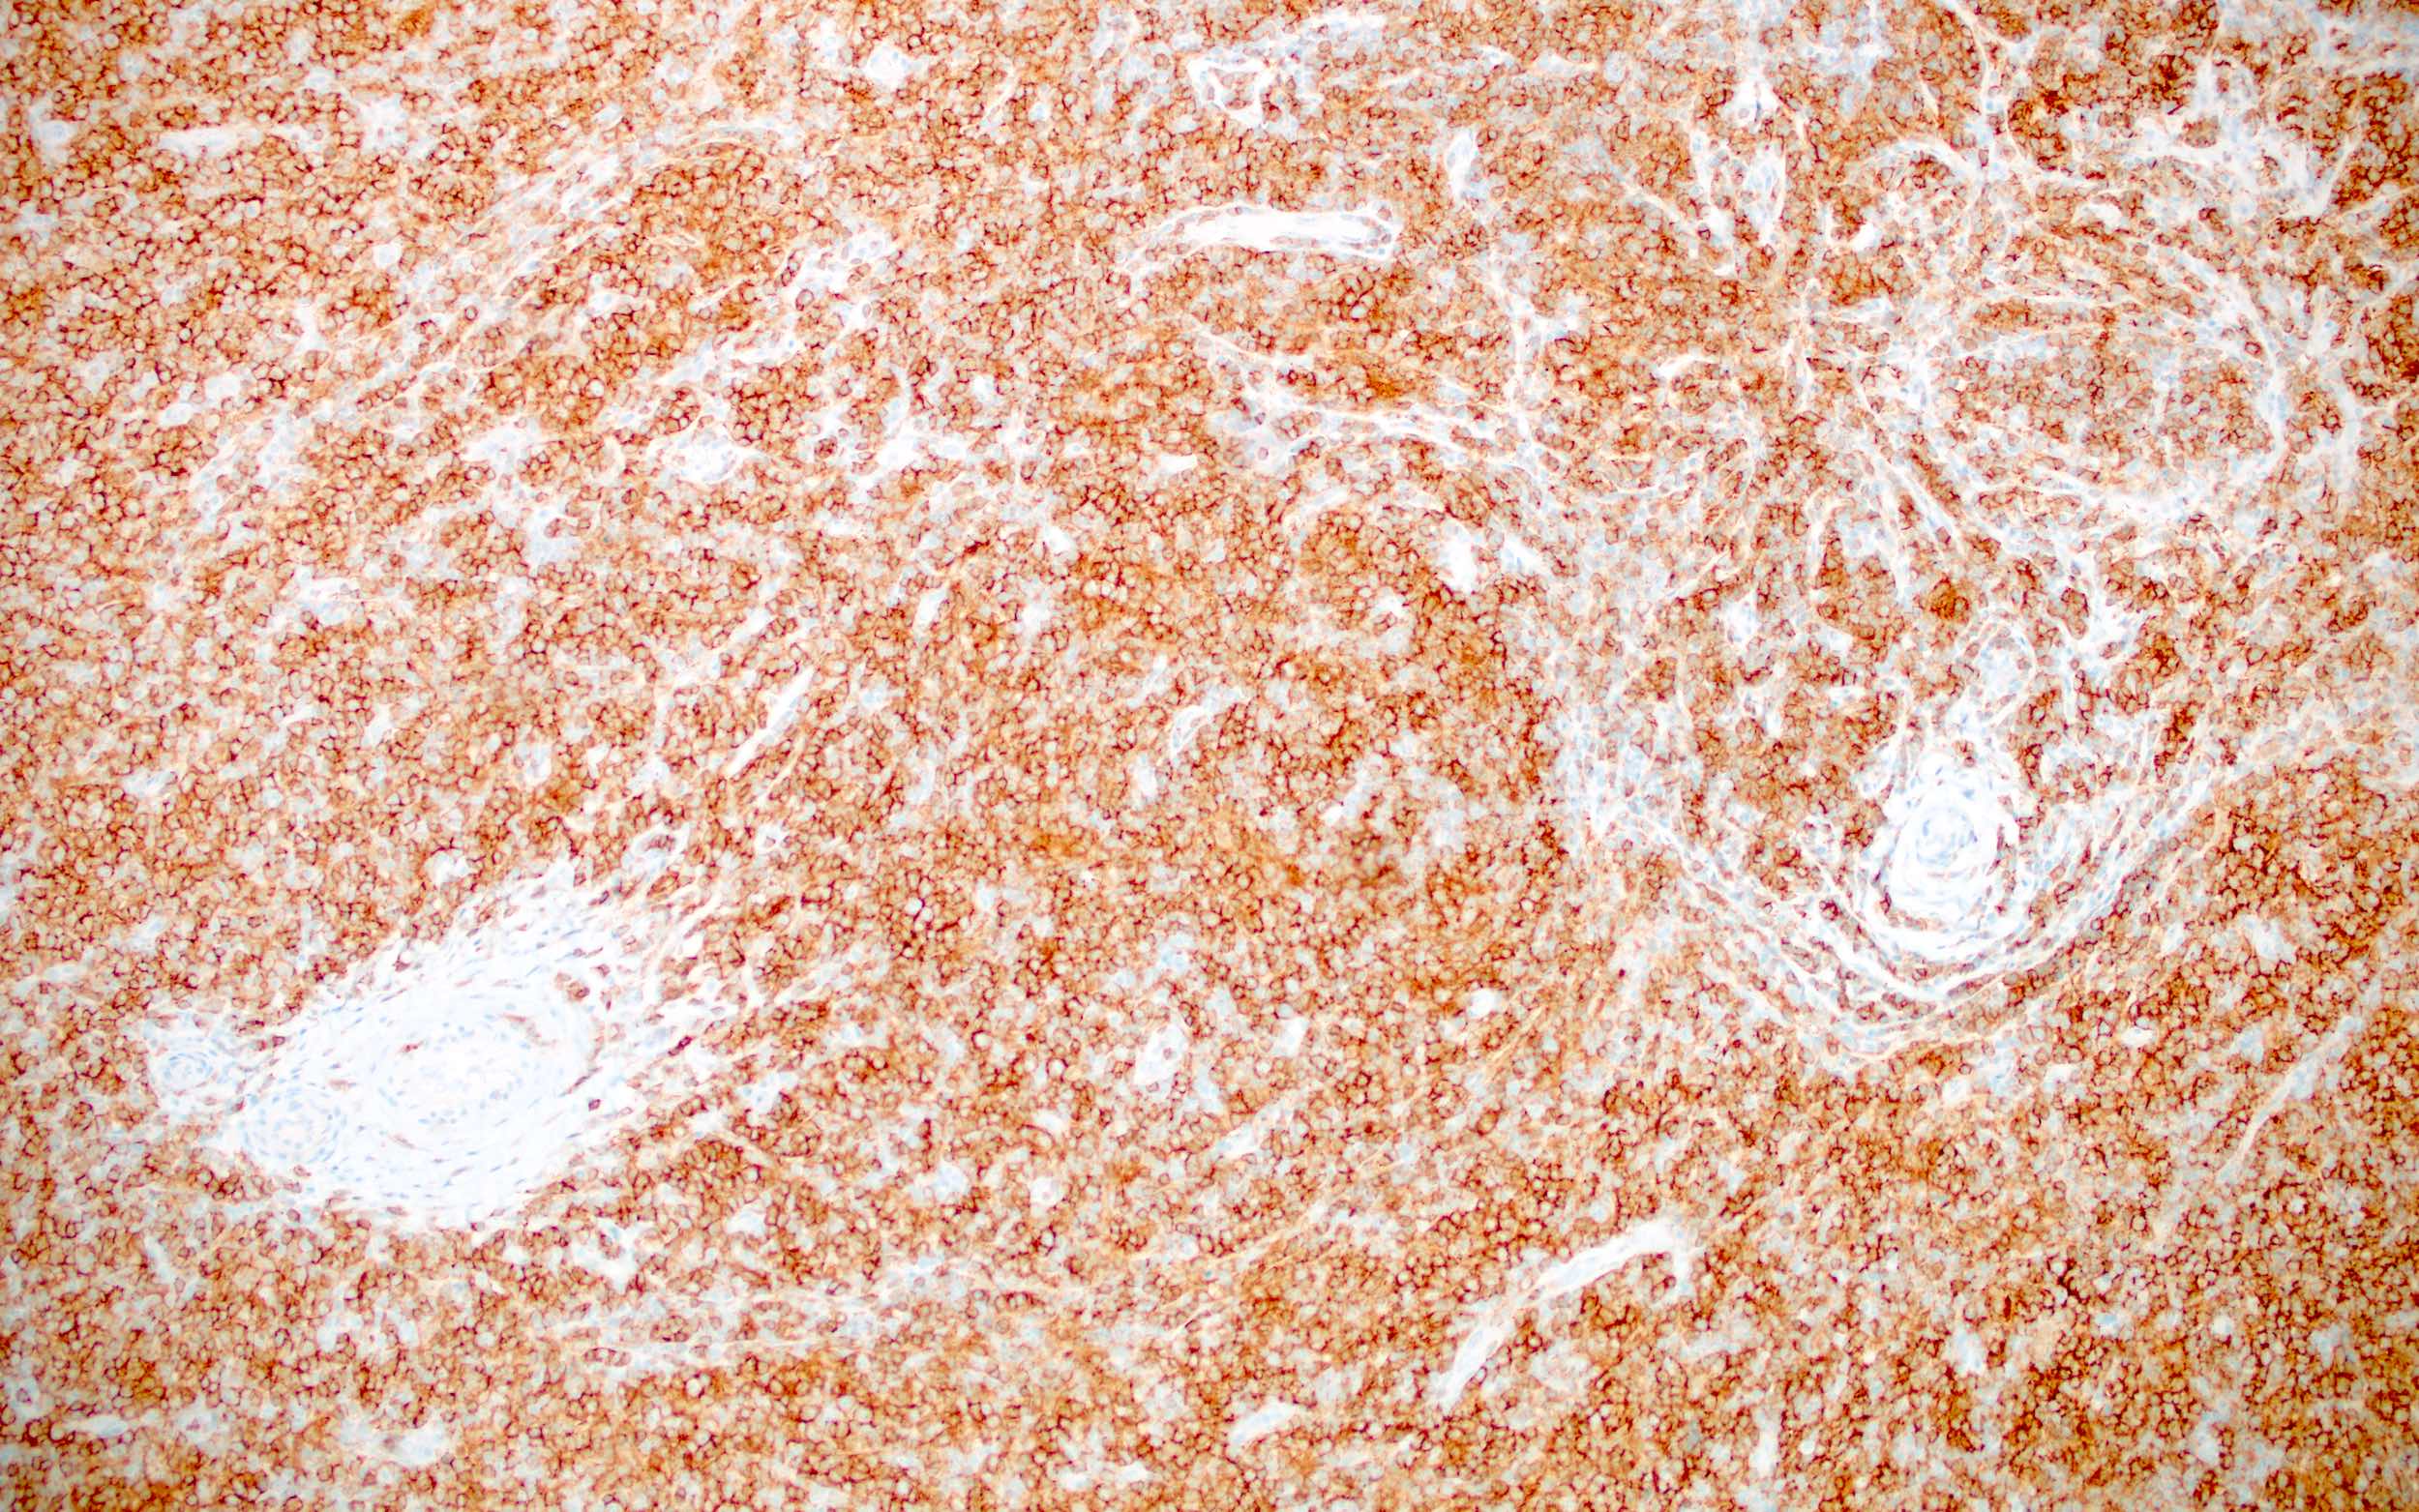 Atypical cells of AITL, CD4+